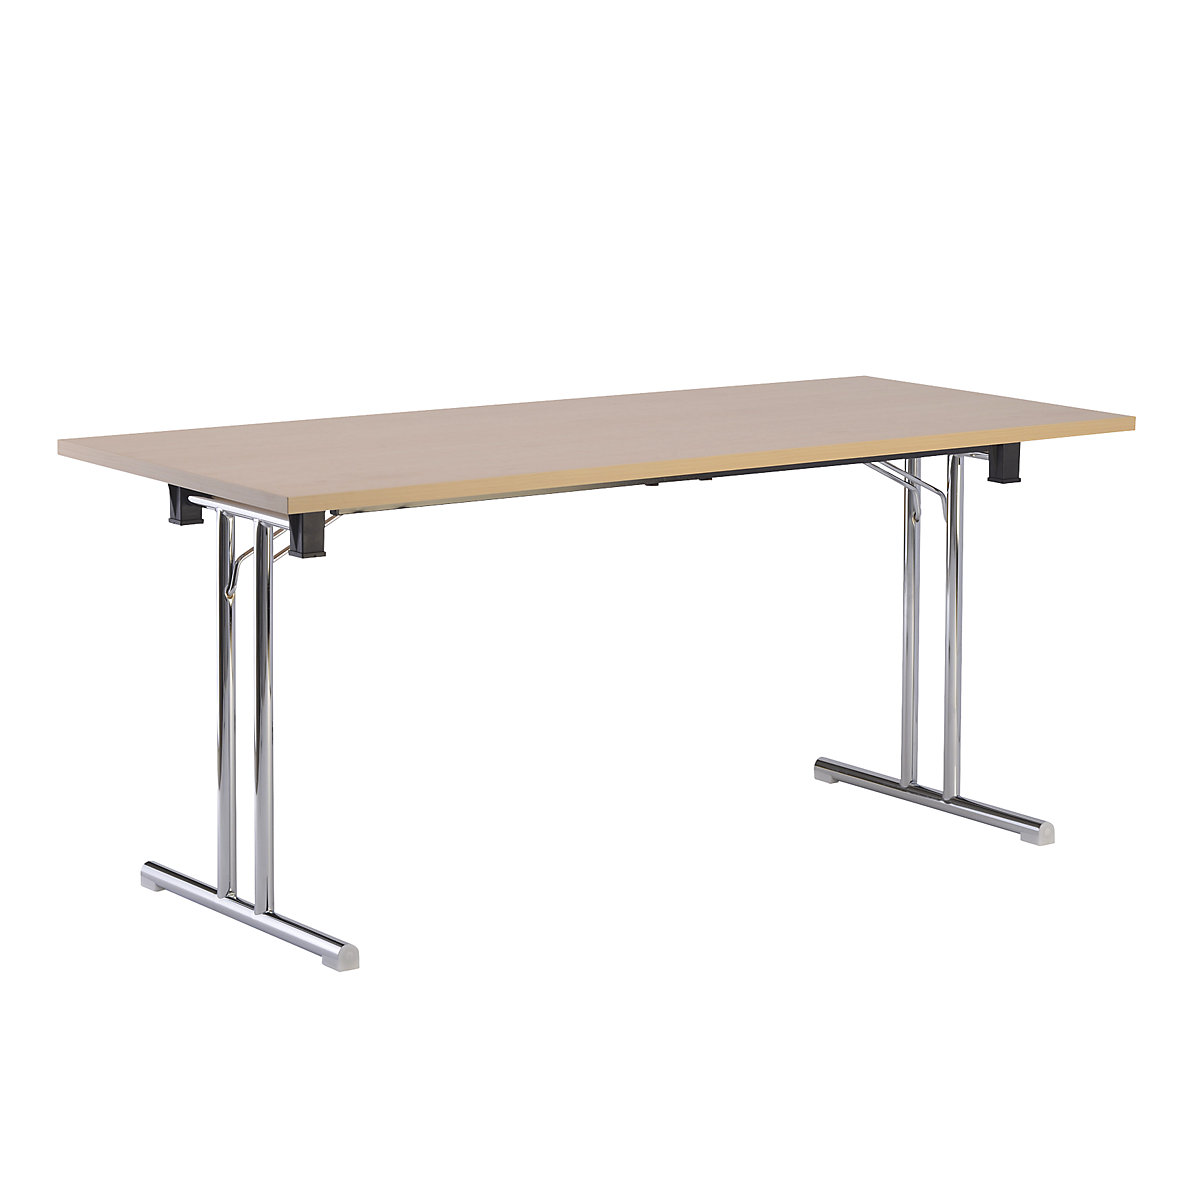 Folding table, double T tubular steel frame with straight runners, width 1400 mm, maple finish-5